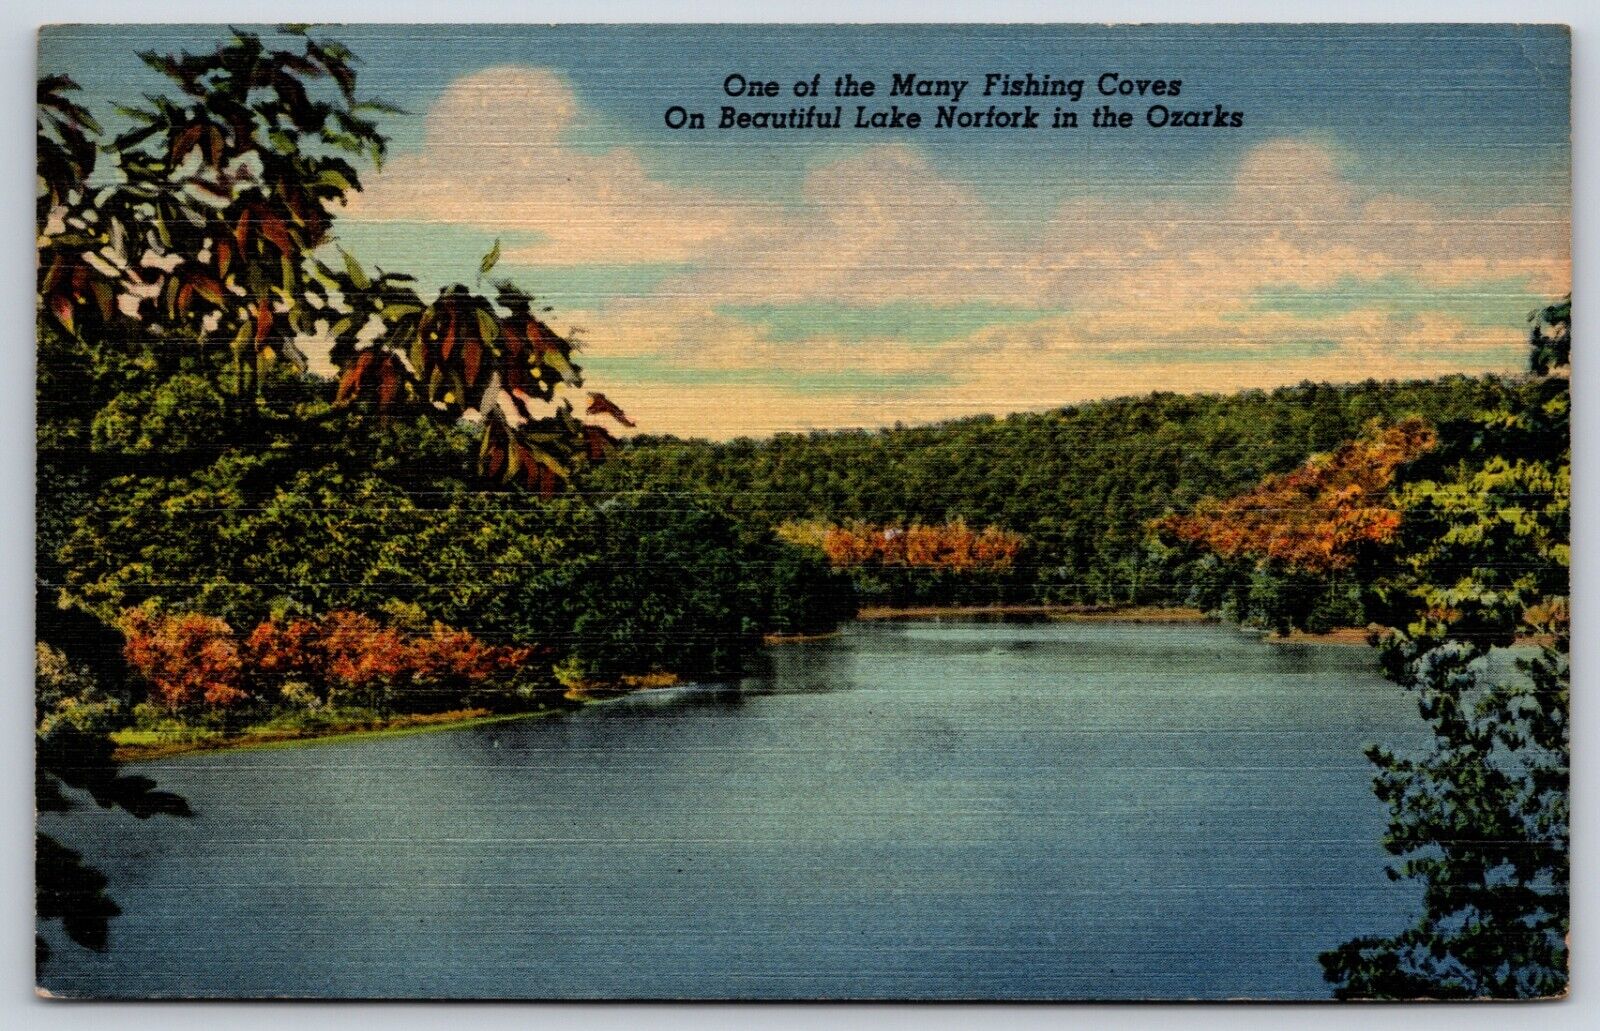 Postcard Fishing Coves On Beautiful Lake Norfork In The Ozarks, MO Posted 1954